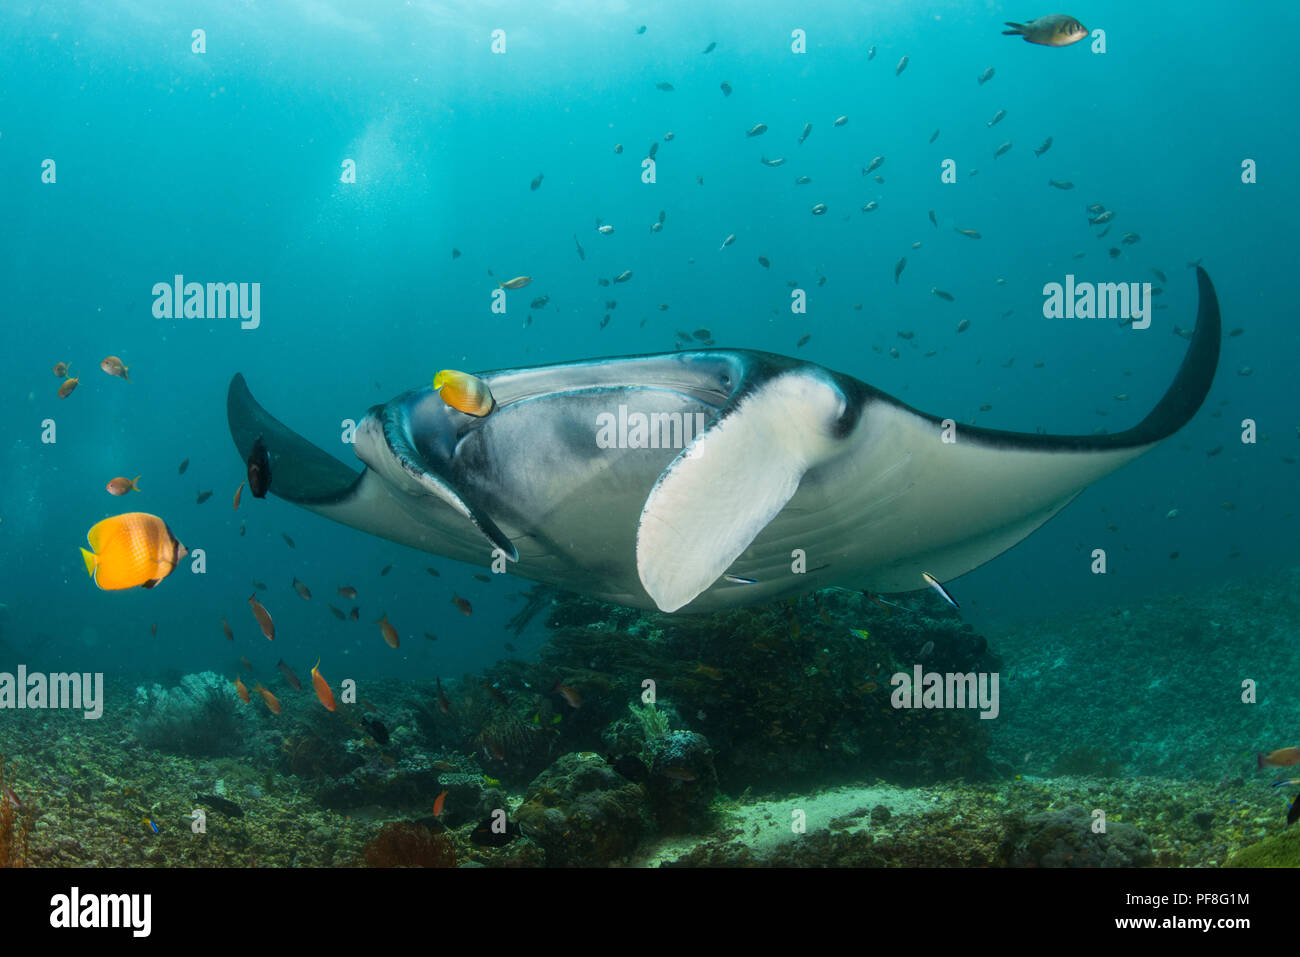 A reef Manta ray getting cleaned by butterflyfish & cleaner wrasse over a 'cleaning station' in Komodo National Park, Indonesia Stock Photo